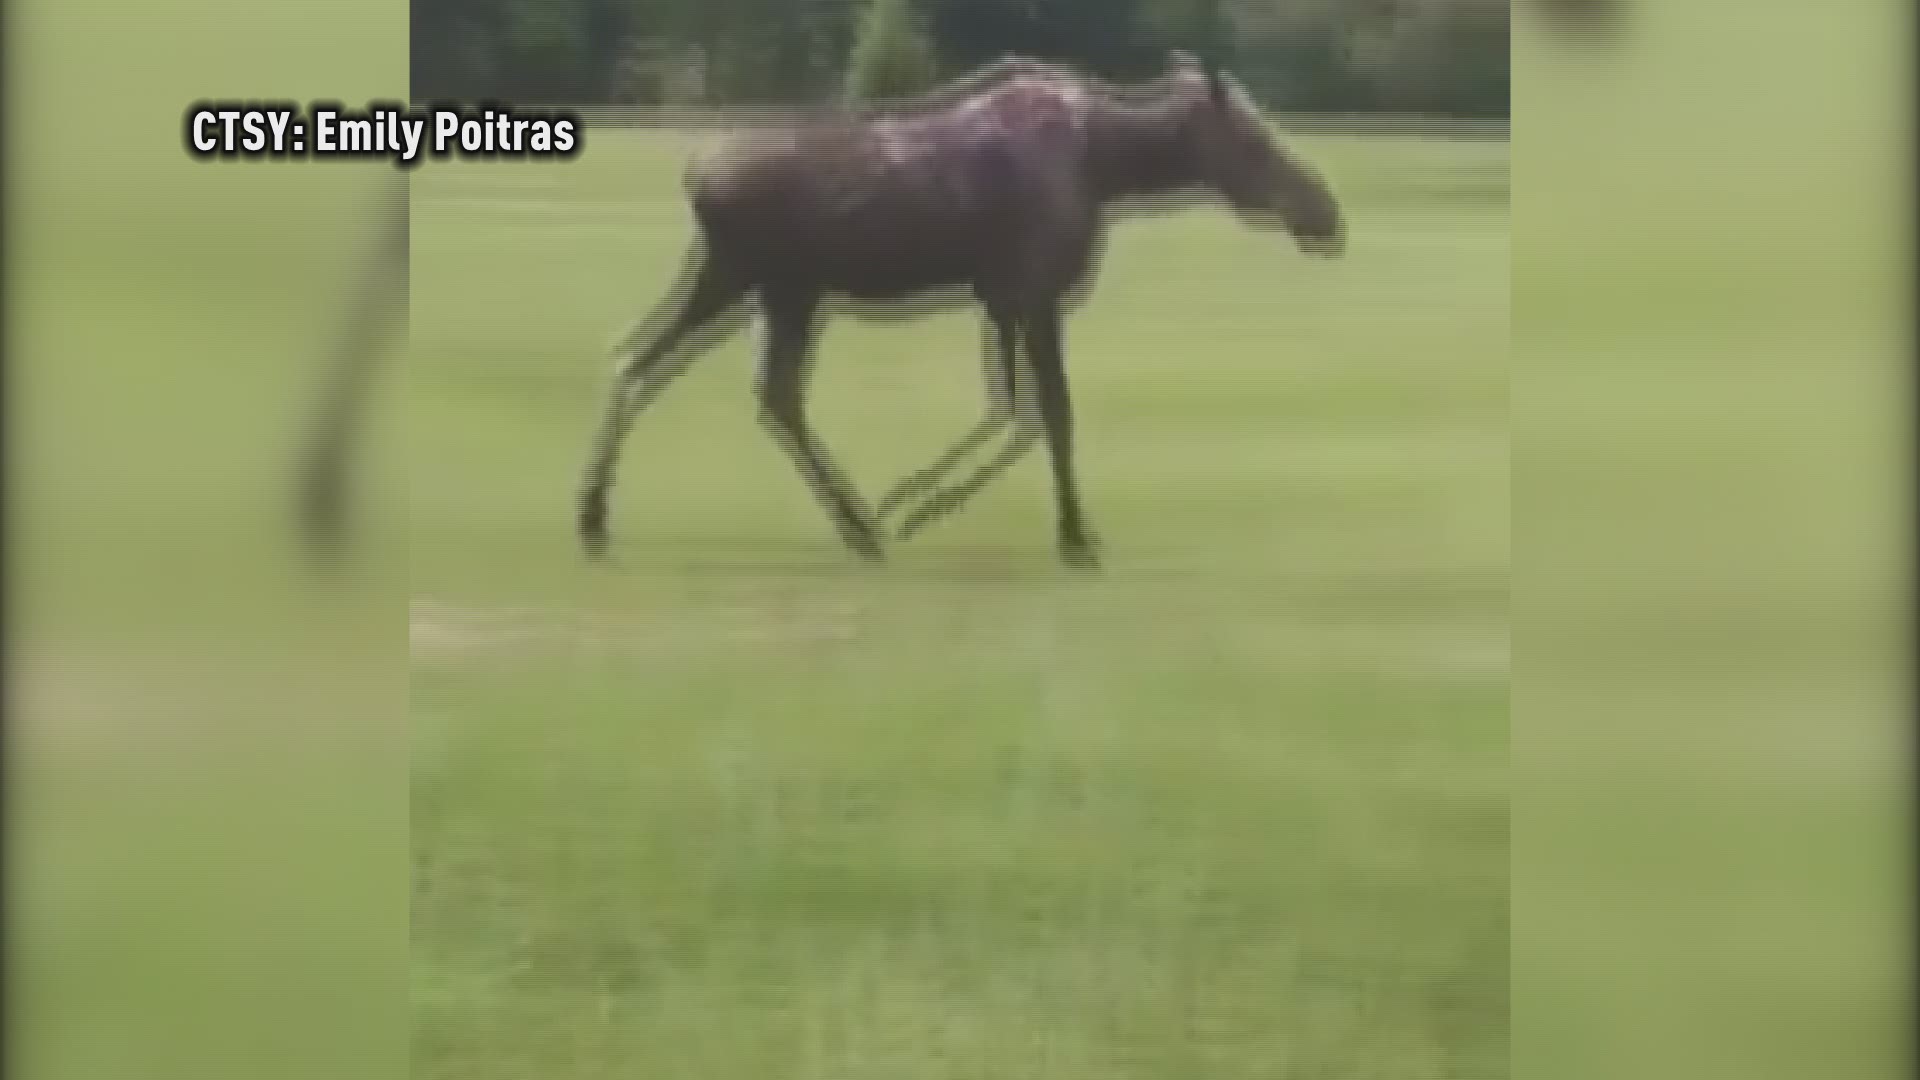 Moose makes major divots at Maine golf course.